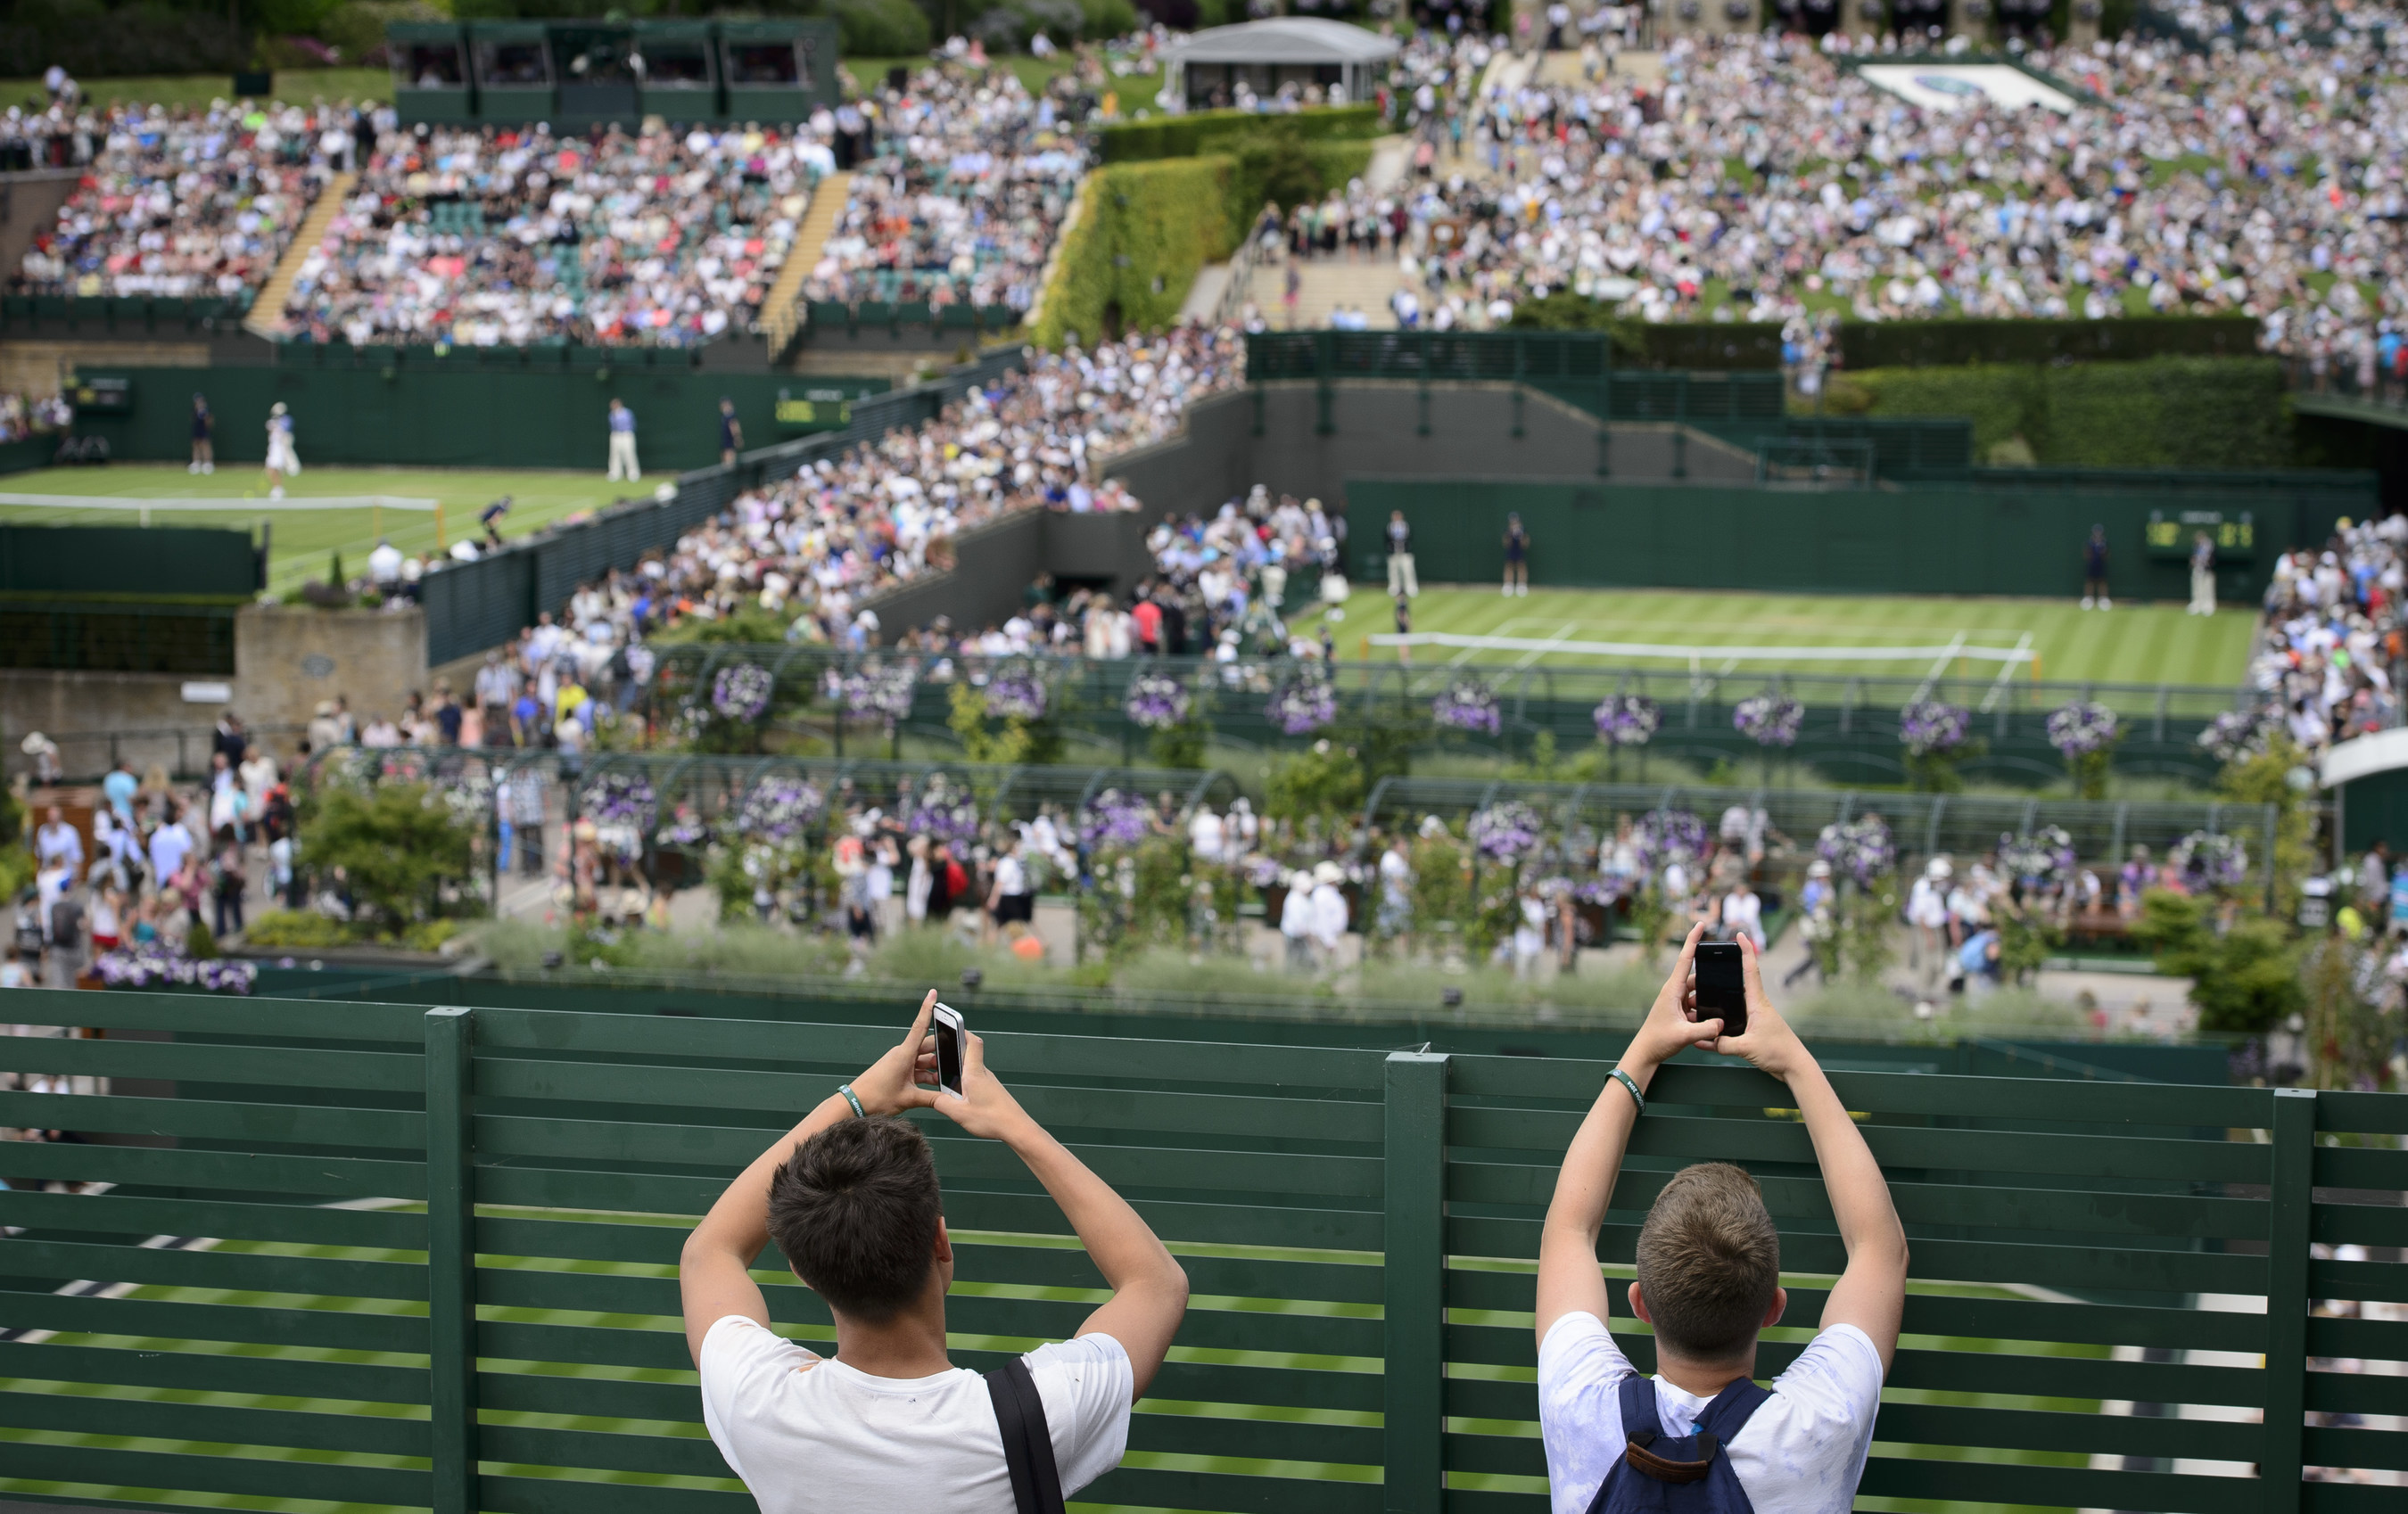 Fans taking photographs with mobile phones. (Credit: The Championships Wimbledon 2014 - The All England Lawn Tennis and Croquet Club)